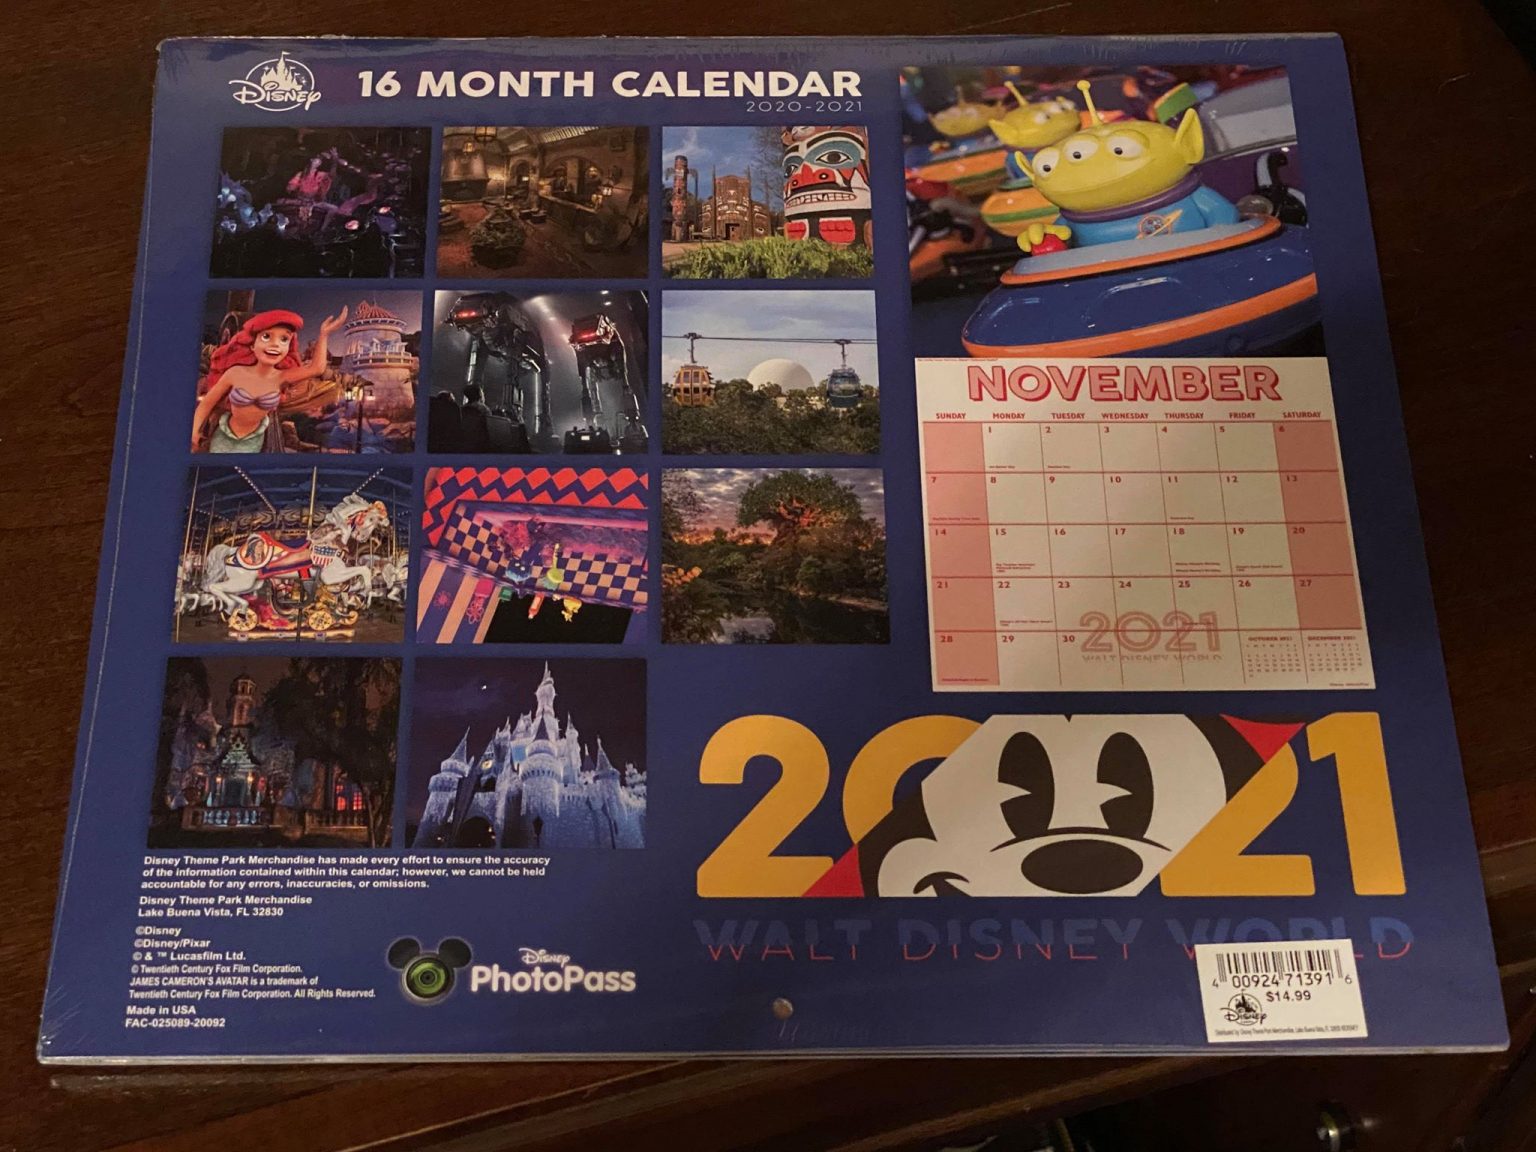 Plan Ahead for 2021 With These Disney Parks Calendars! Disney Fashion